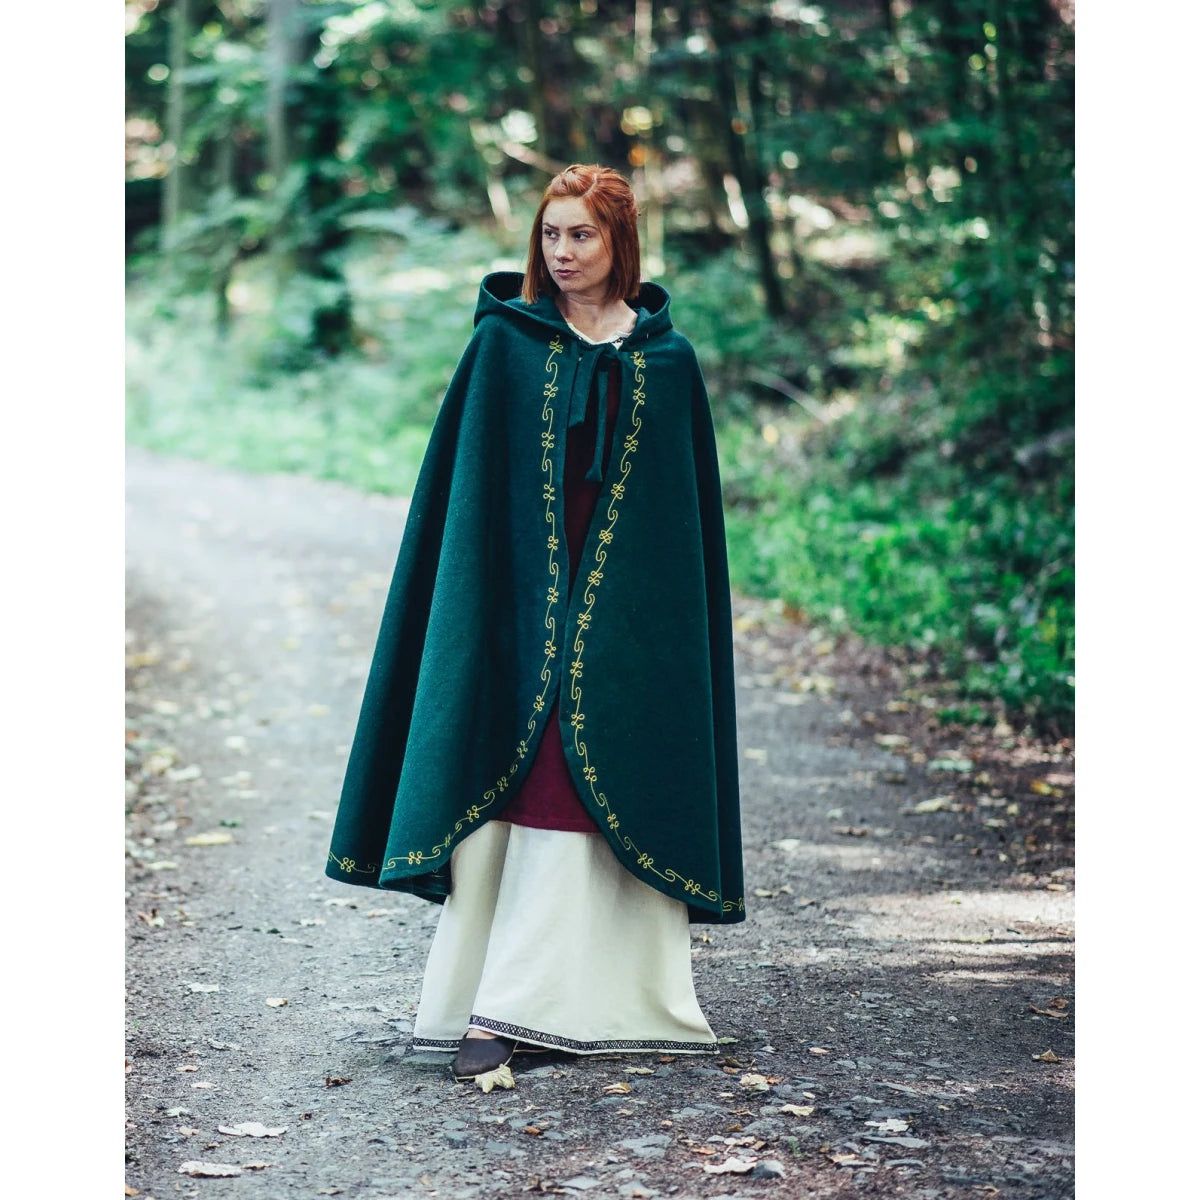 Blue Hooded Renaissance Cloak | Exquisite Hand Embroidery